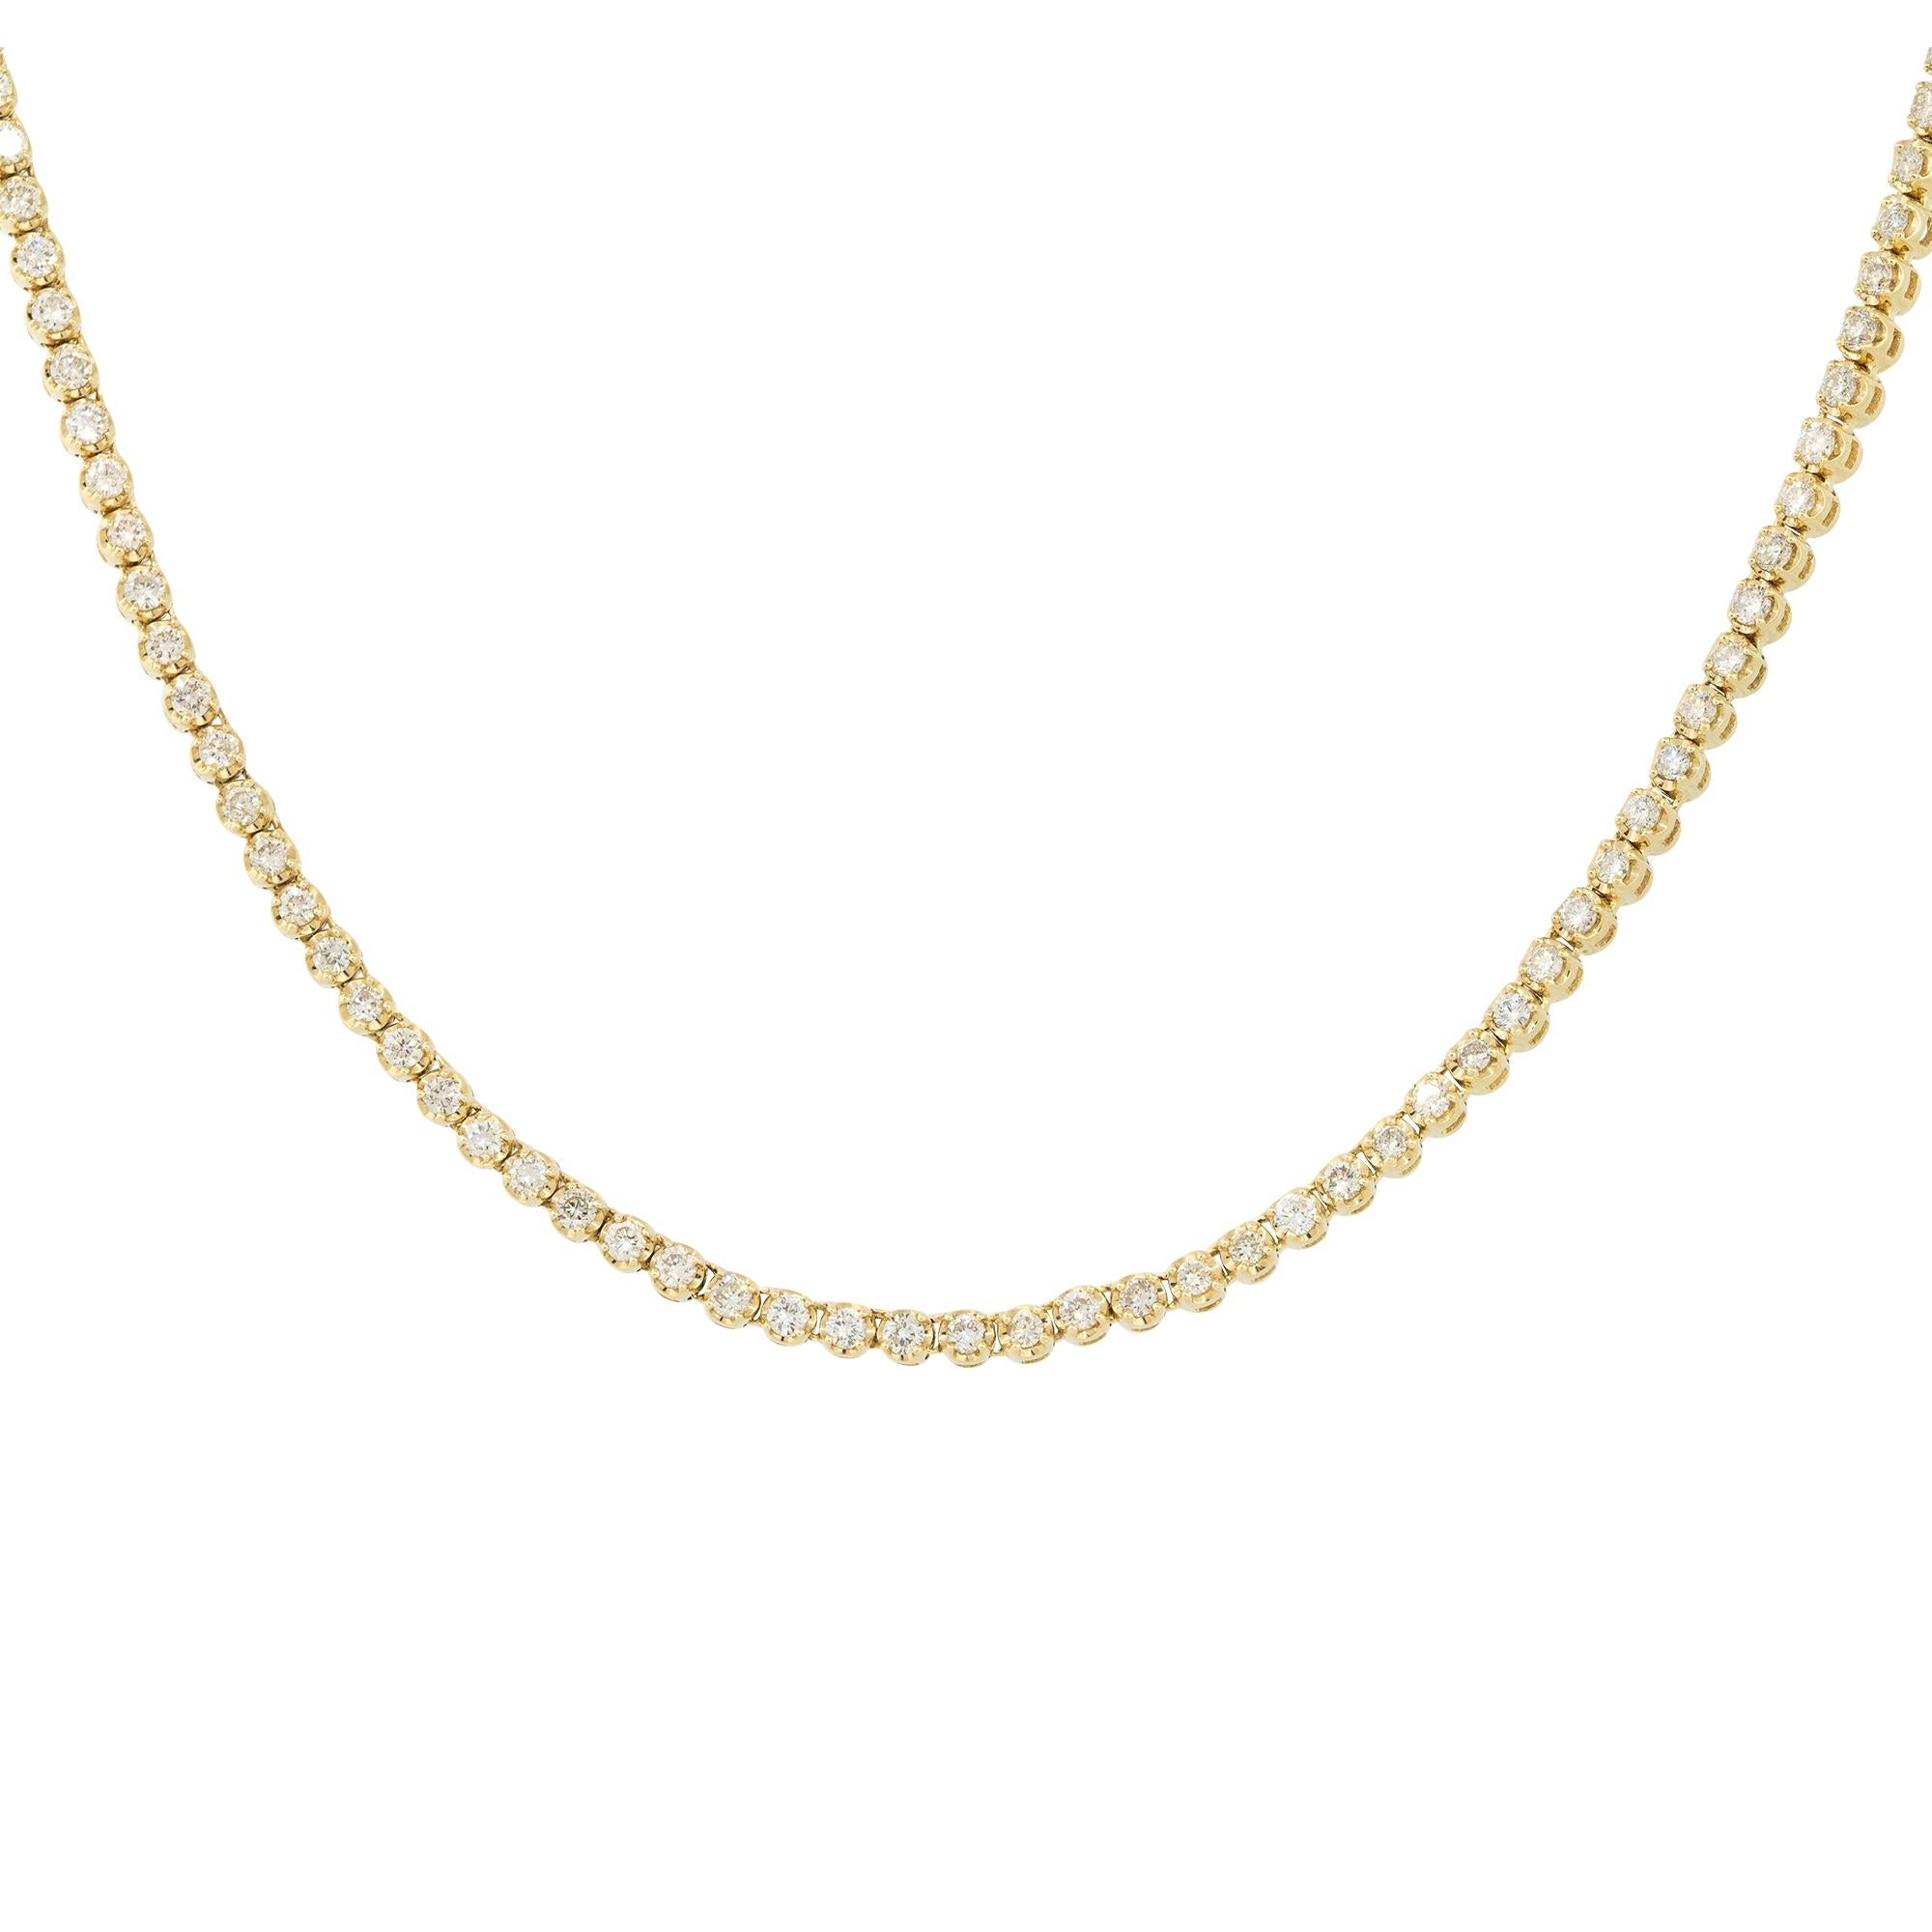 14k Yellow Gold 3.80ctw Diamond Tennis Necklace

Material: 14k Yellow Gold
Diamond Details: Approximately 3.80ctw of Round Brilliant Diamonds
Fastening: Tongue in Box Clasp
Measurements: 18